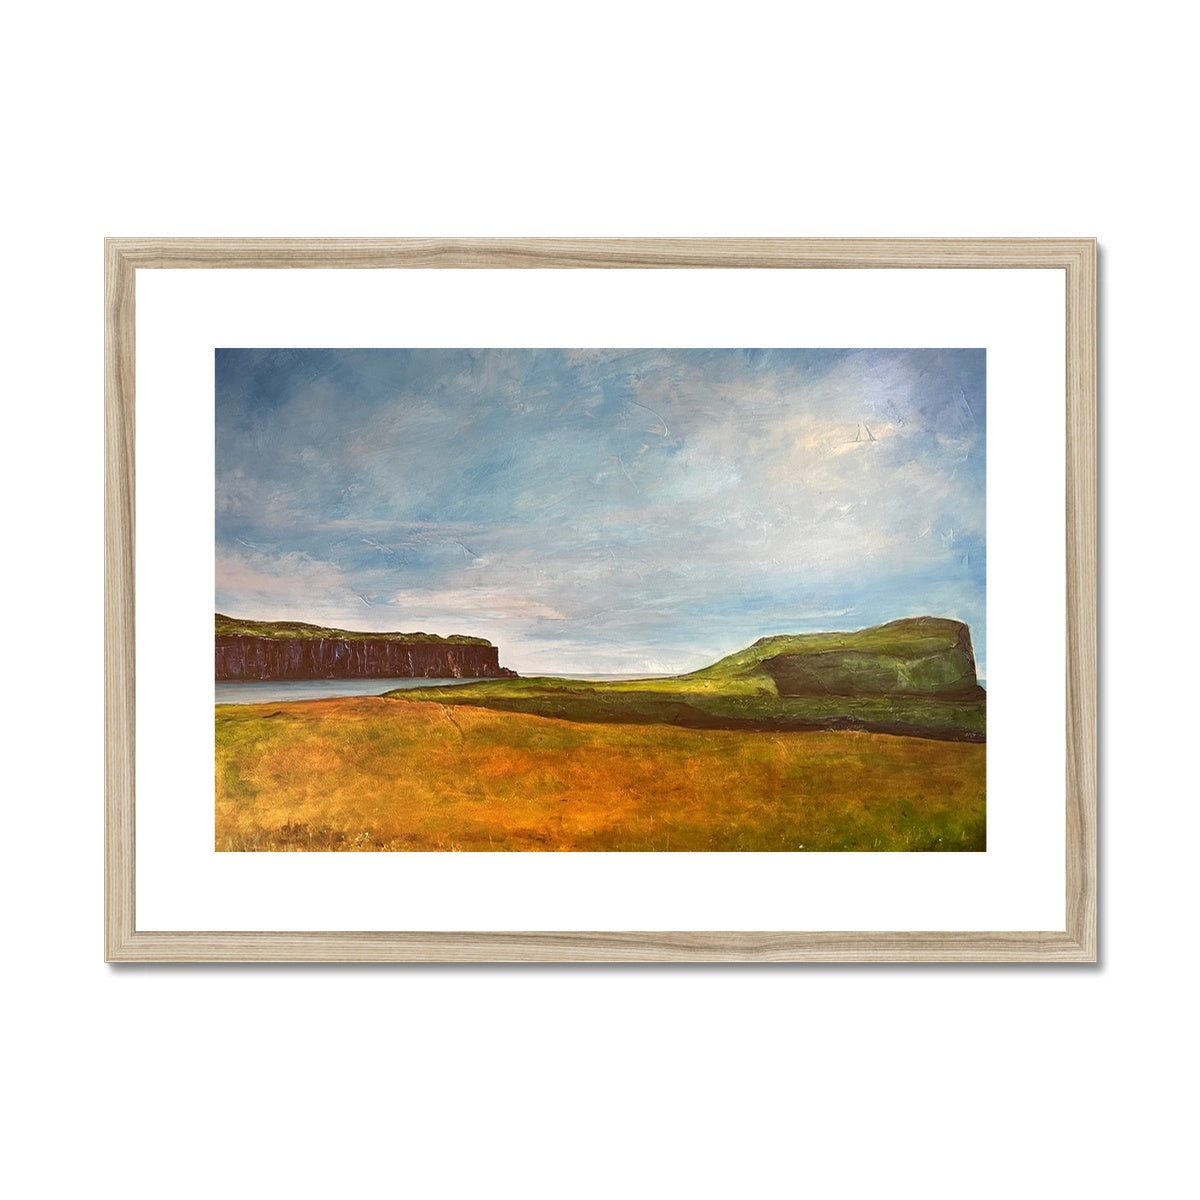 Approaching Oronsay Skye Painting | Framed & Mounted Prints From Scotland-Framed & Mounted Prints-Skye Art Gallery-A2 Landscape-Natural Frame-Paintings, Prints, Homeware, Art Gifts From Scotland By Scottish Artist Kevin Hunter